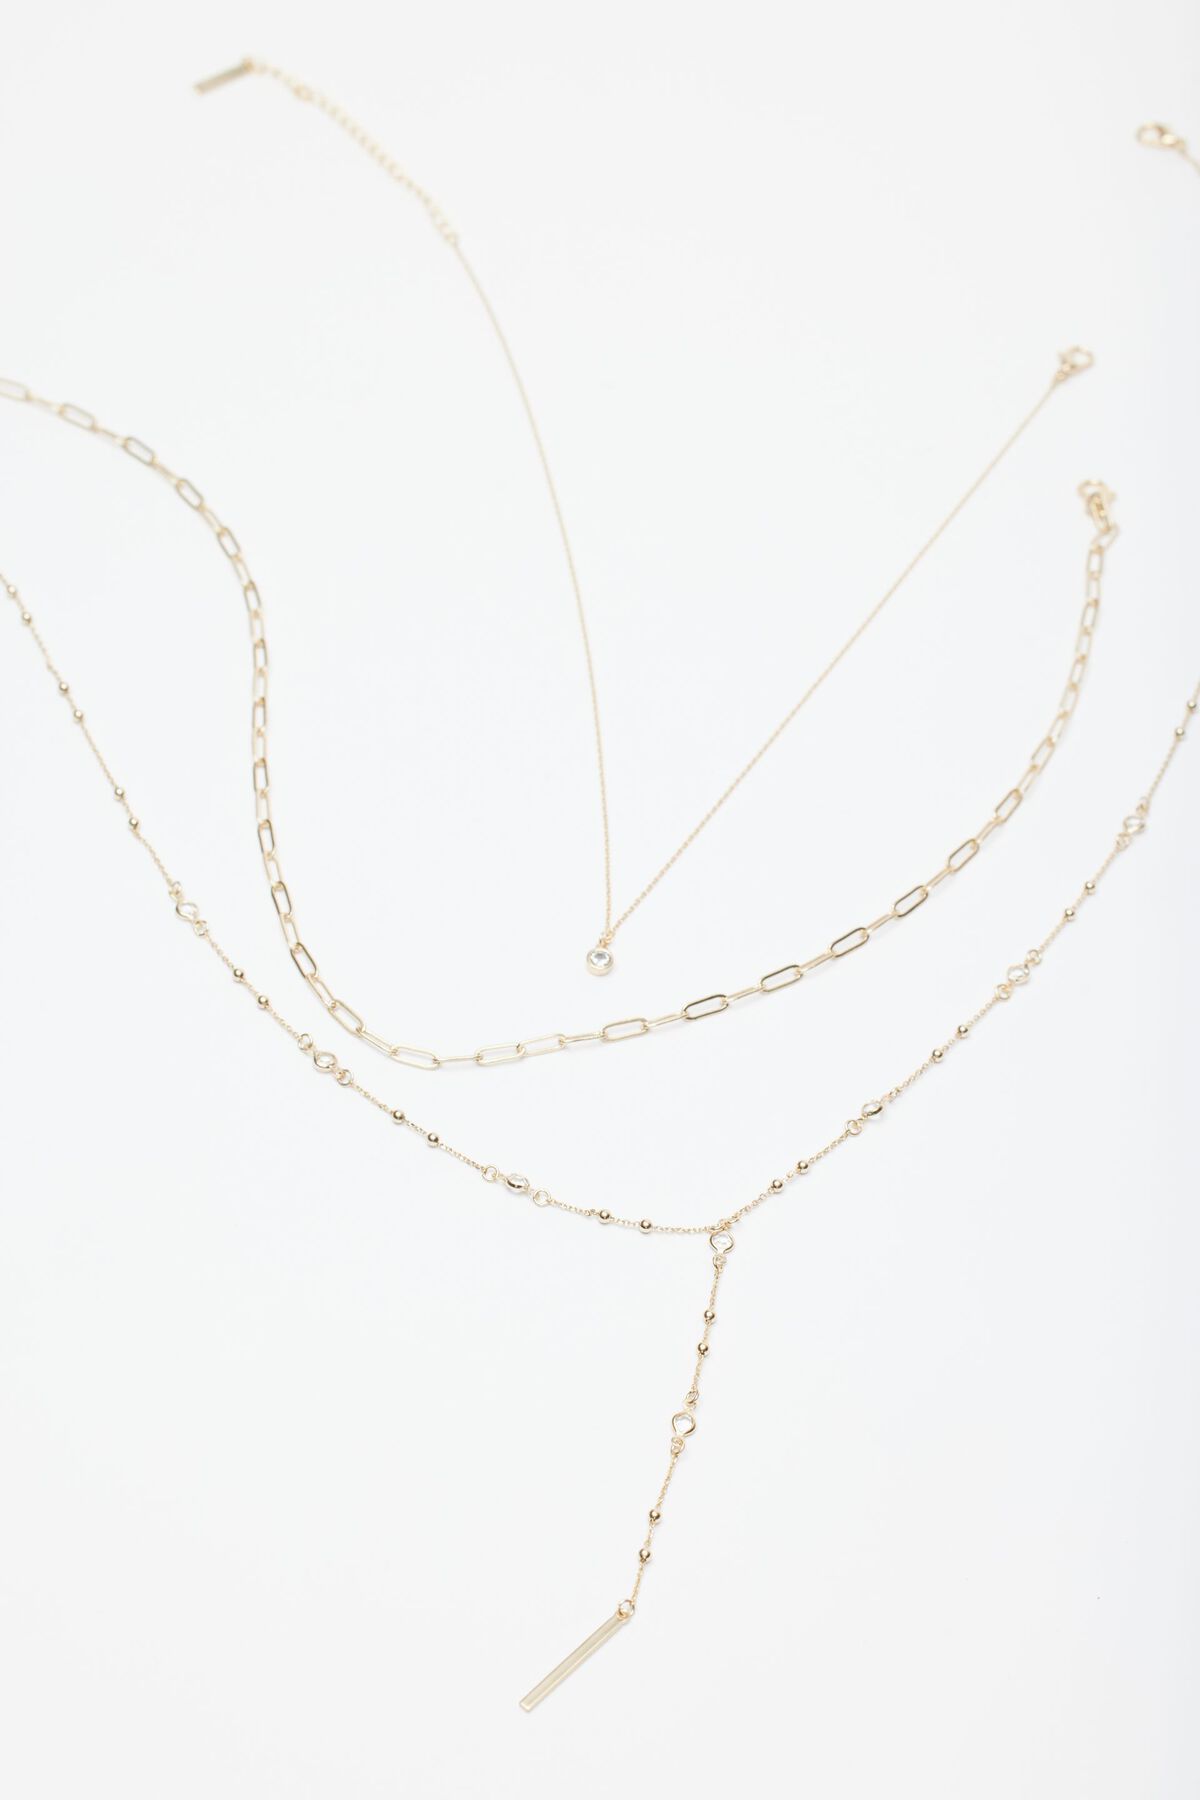 Dynamite Layered Thin, Paperclip & T-Bar Gem Chain Necklace. 2